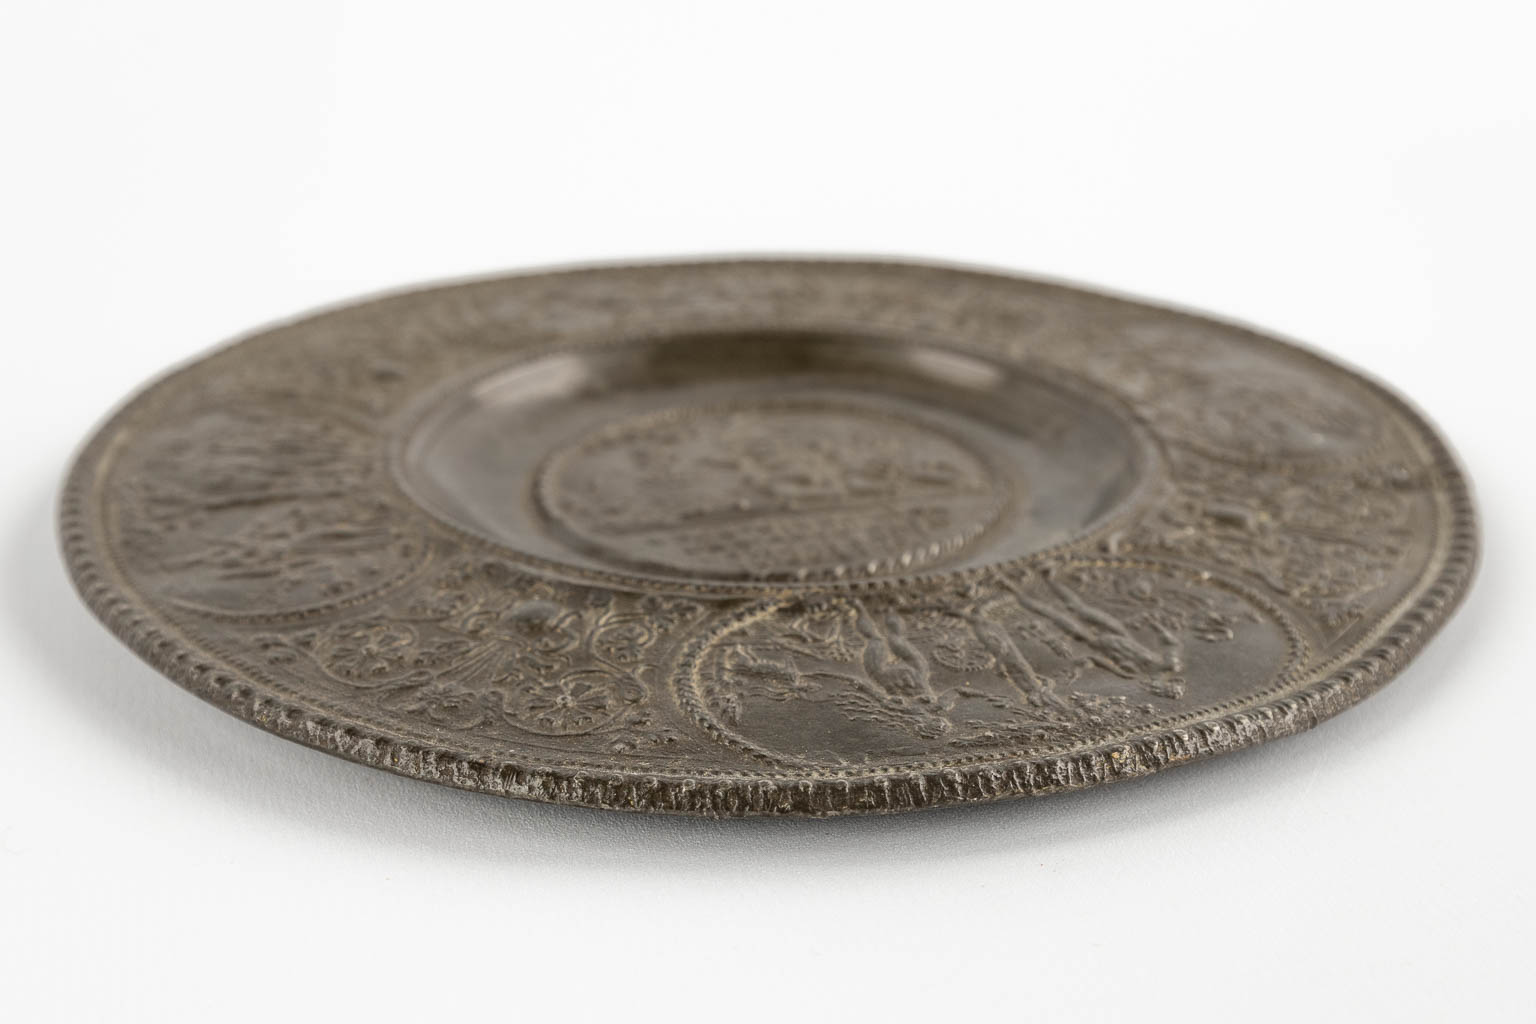 Paulus Oeham de Oude, Nuremberg, Germany. A relief plate, pewter. 17th C. (D:17,8 cm) - Image 7 of 11